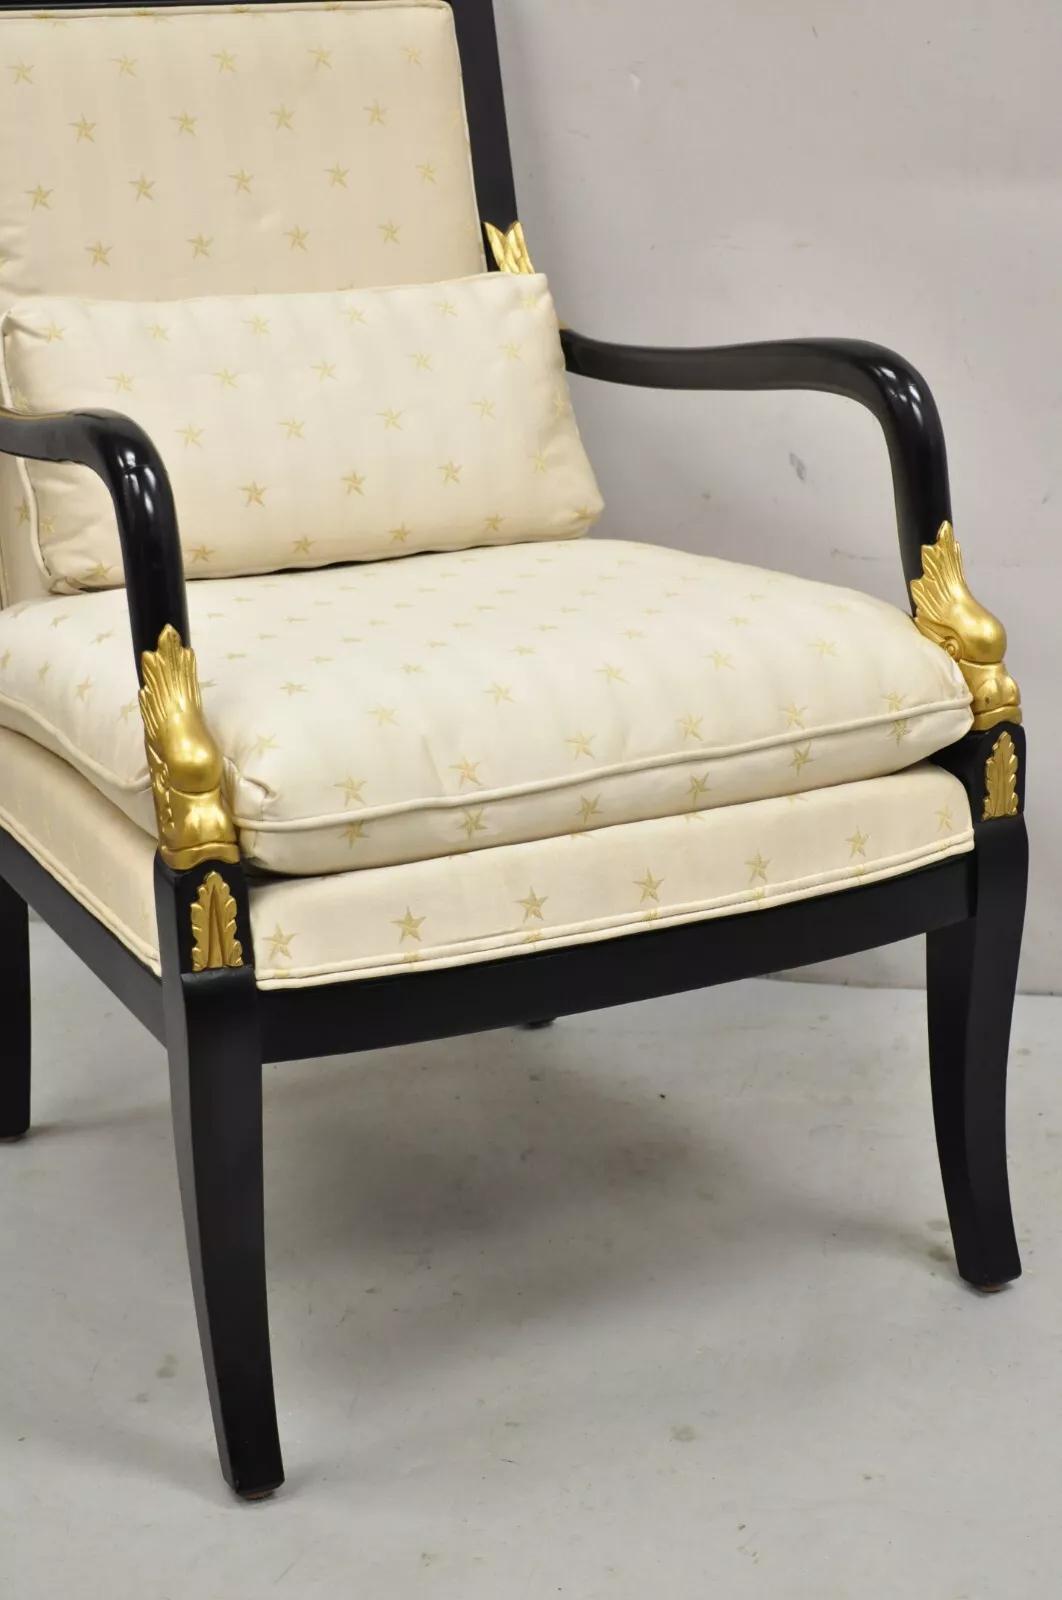 Ethan Allen French Empire Style Black Lacquer Gold Dolphin Upholstered Arm Chair For Sale 2